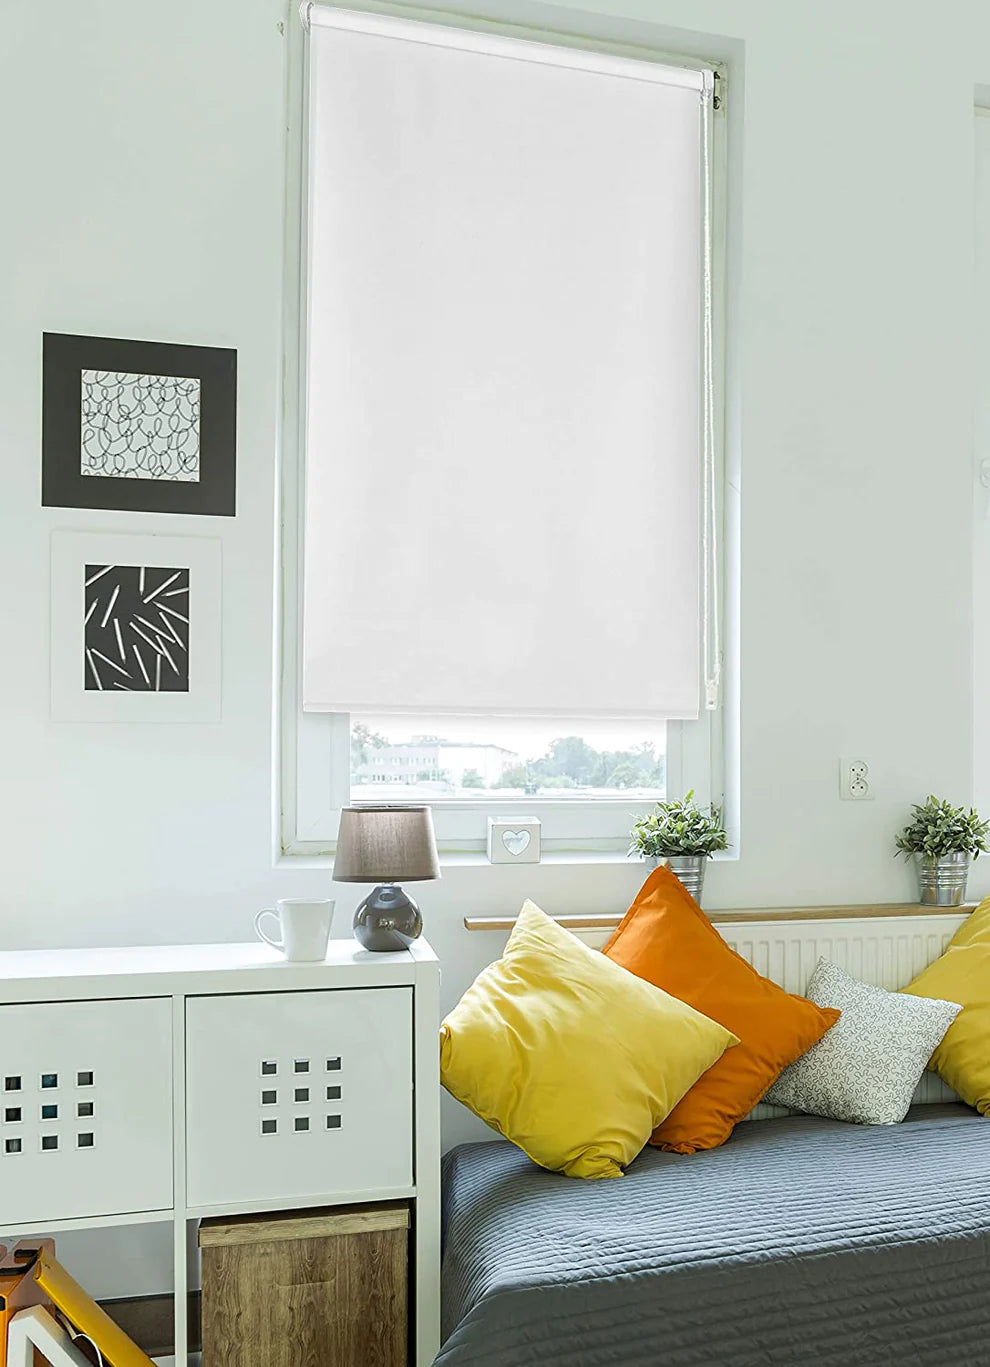 Why Roller Blinds Are a Great Option for Your Home